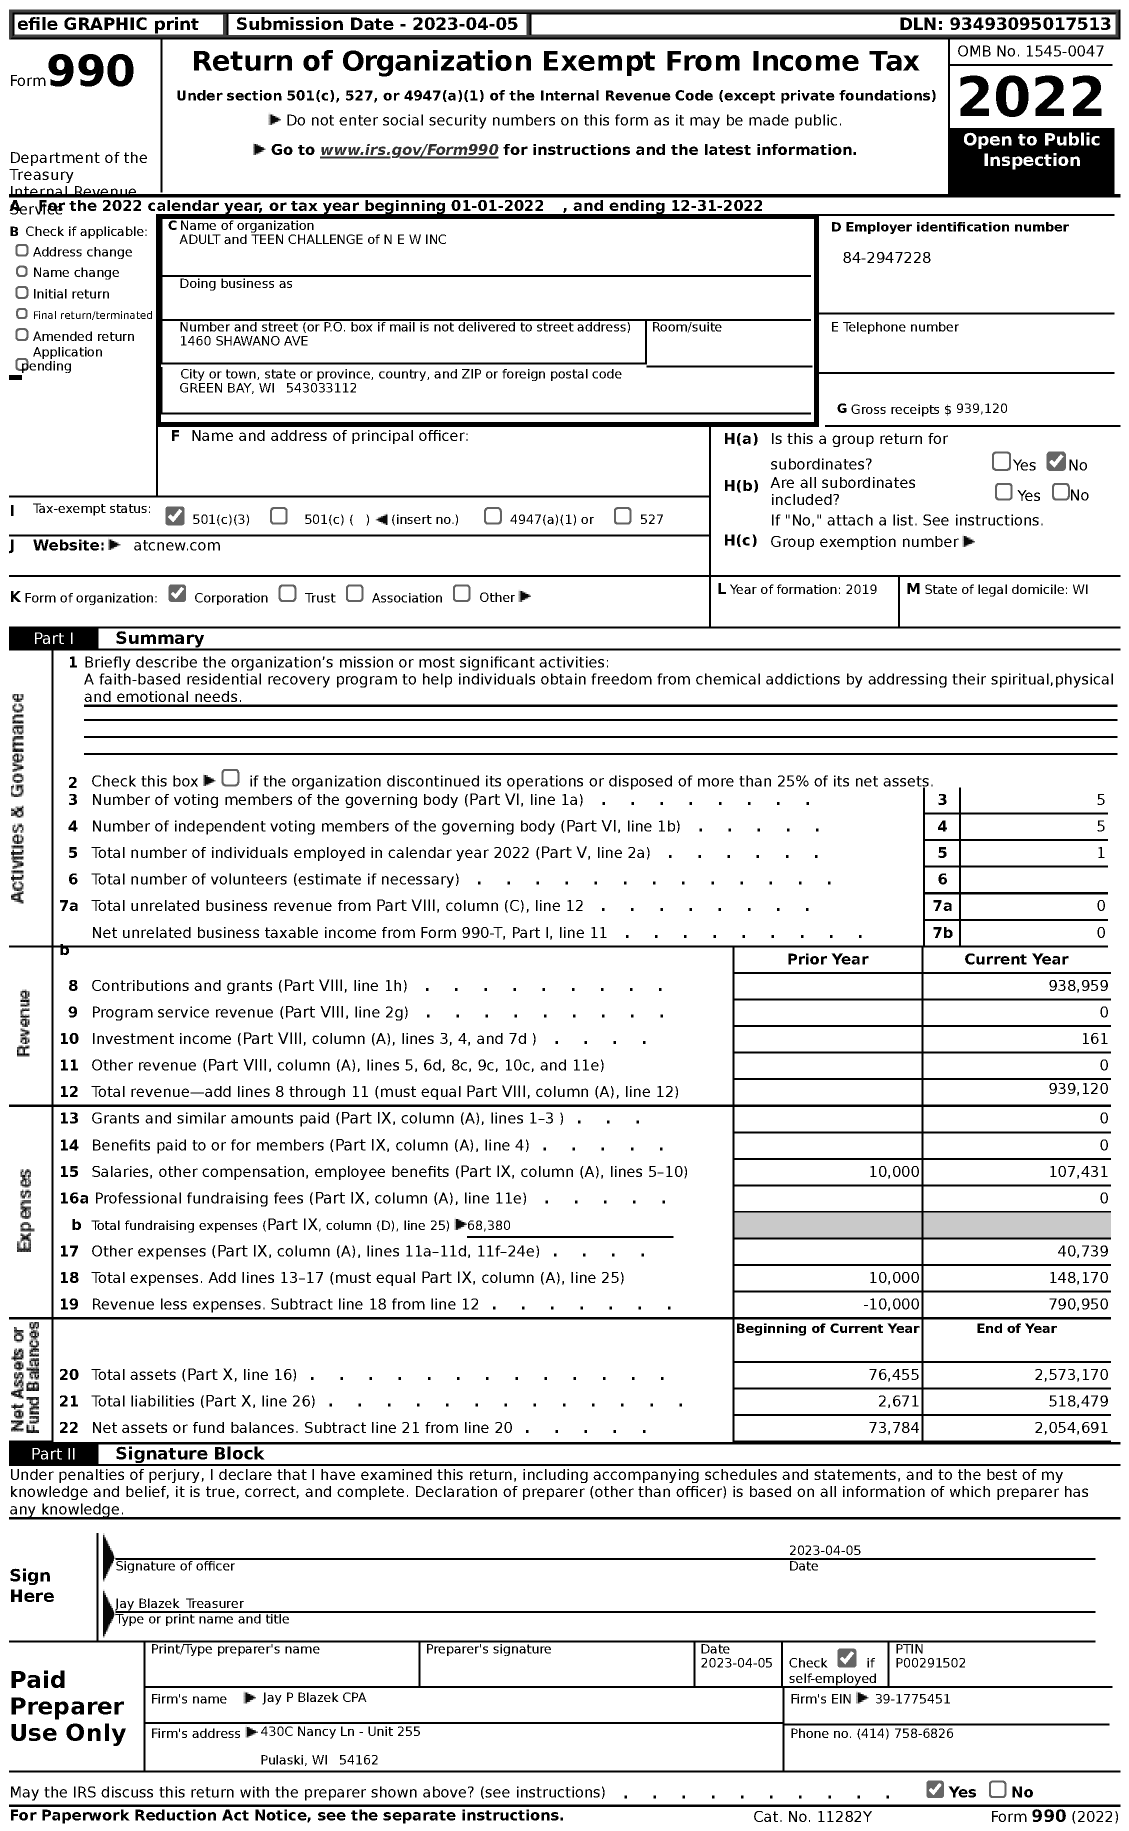 Image of first page of 2022 Form 990 for Adult and Teen Challenge of N E W